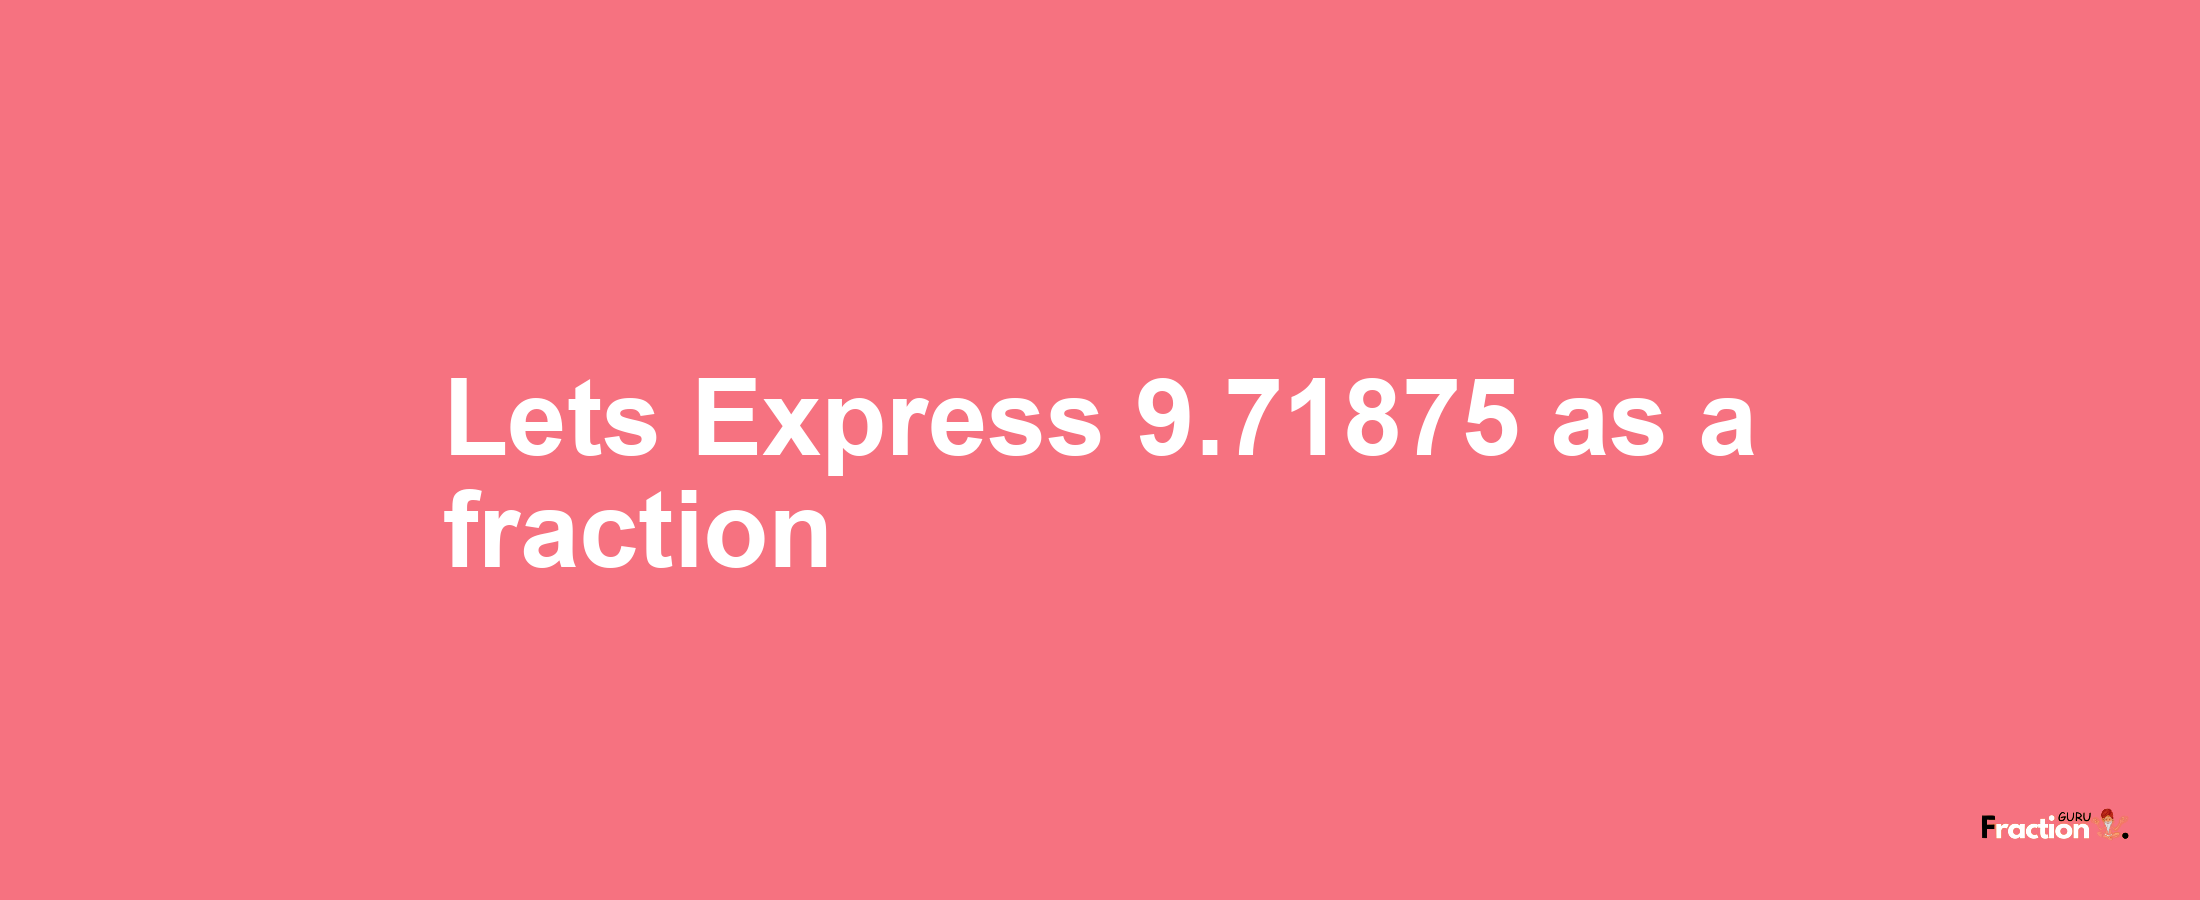 Lets Express 9.71875 as afraction